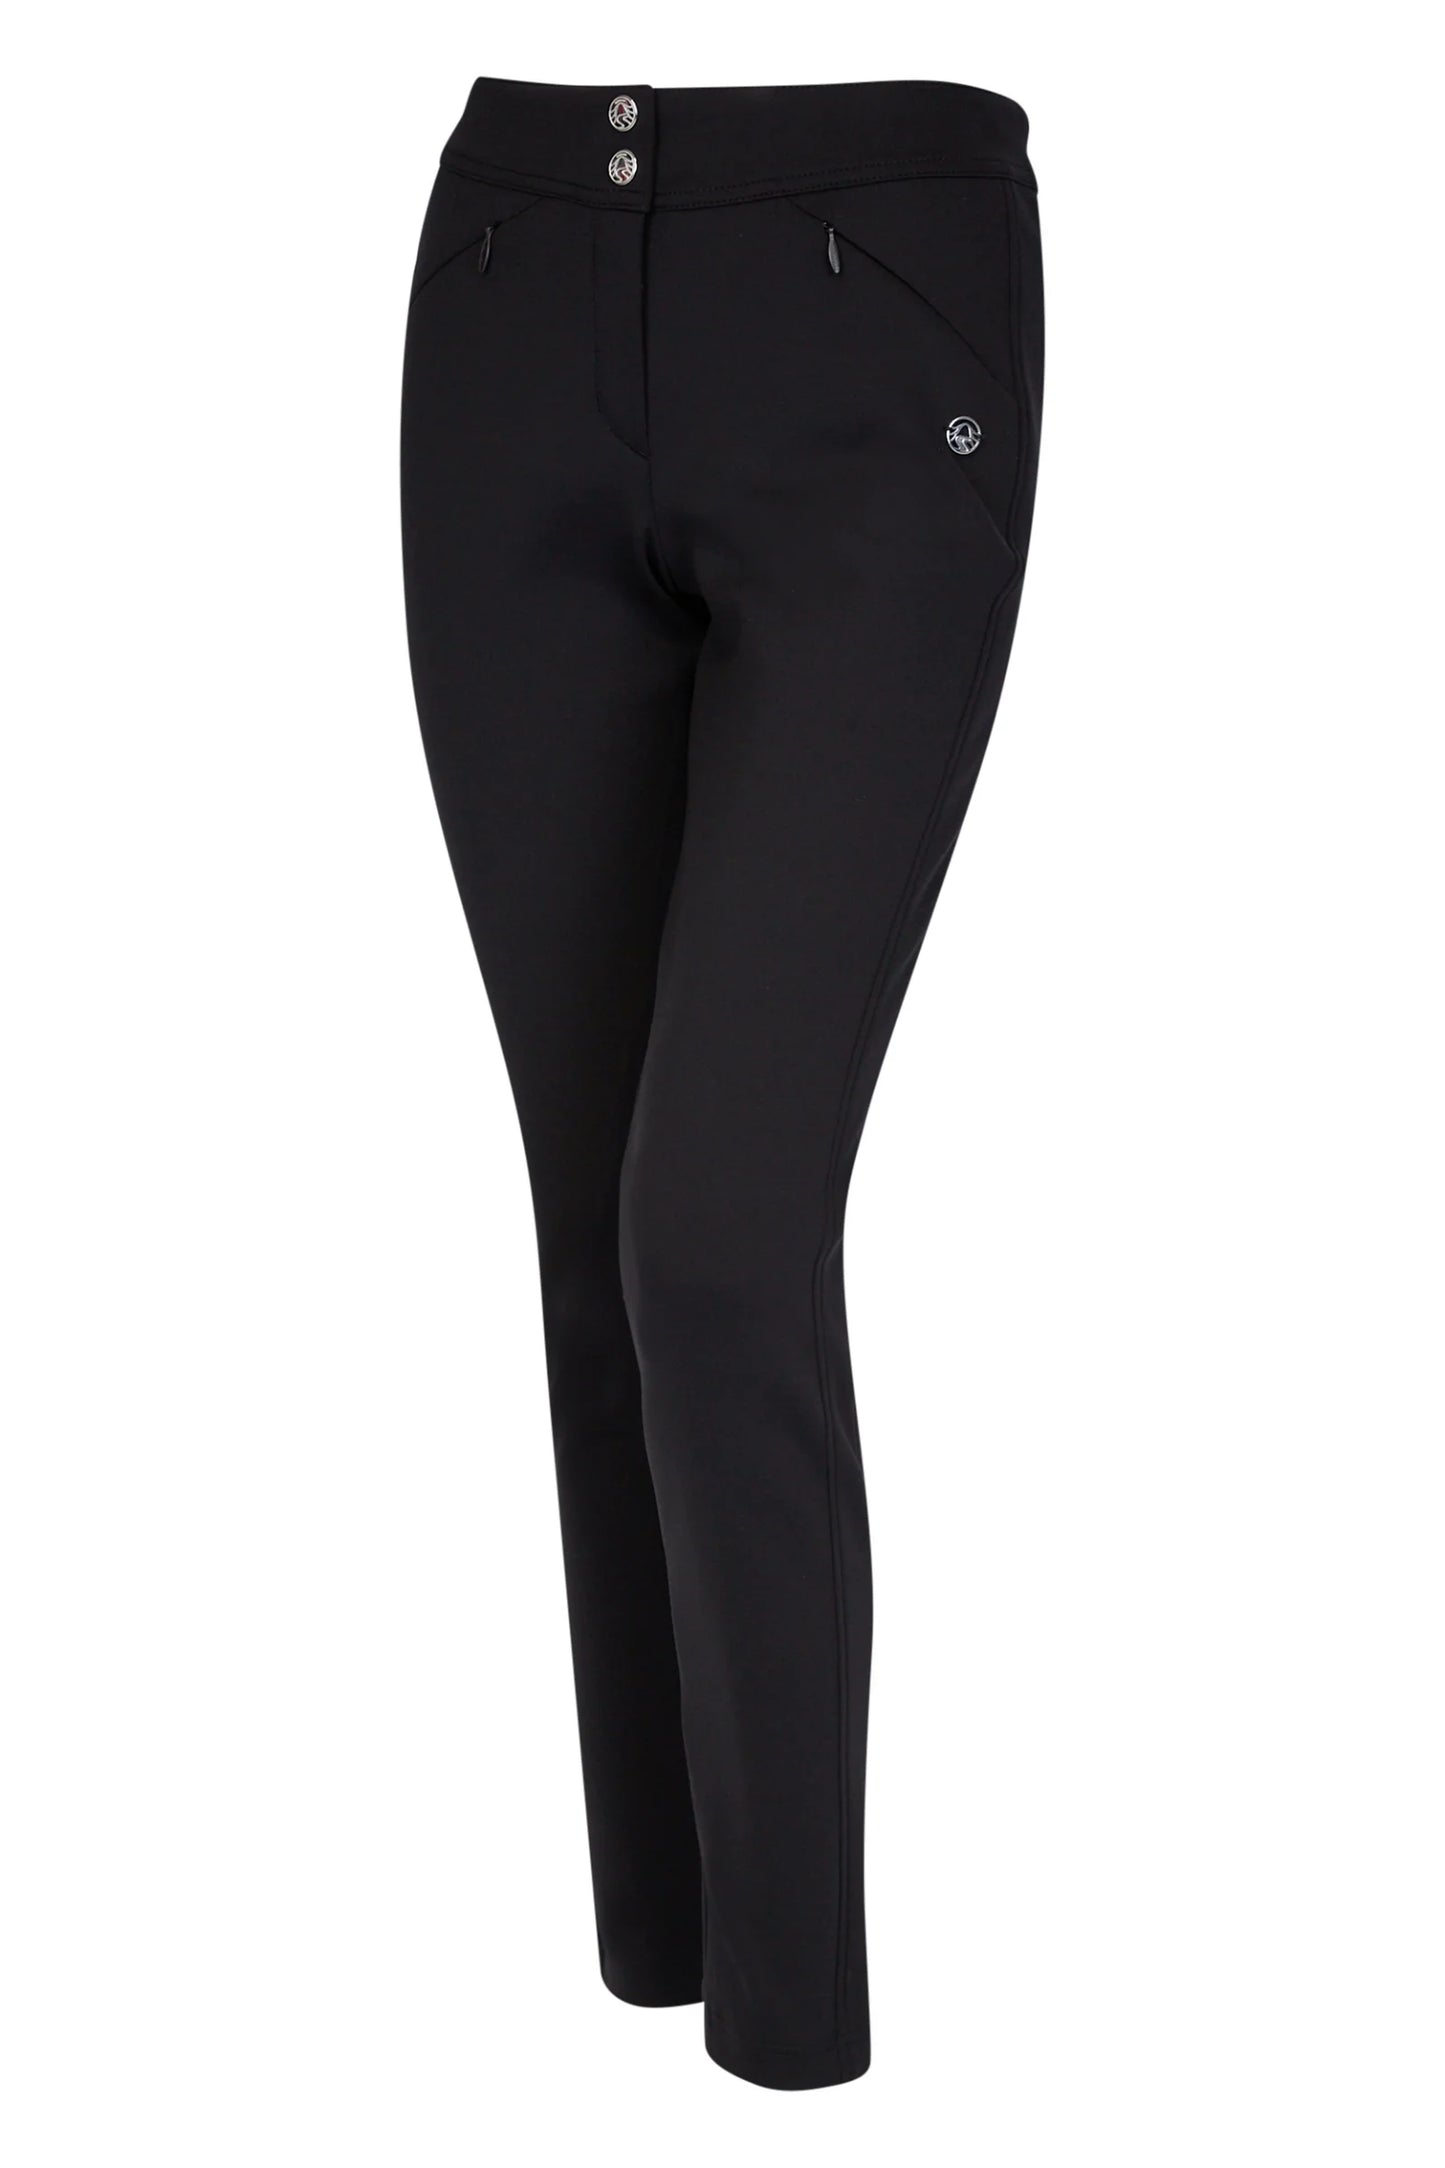 Stretch Material Trousers with Zipper Pockets